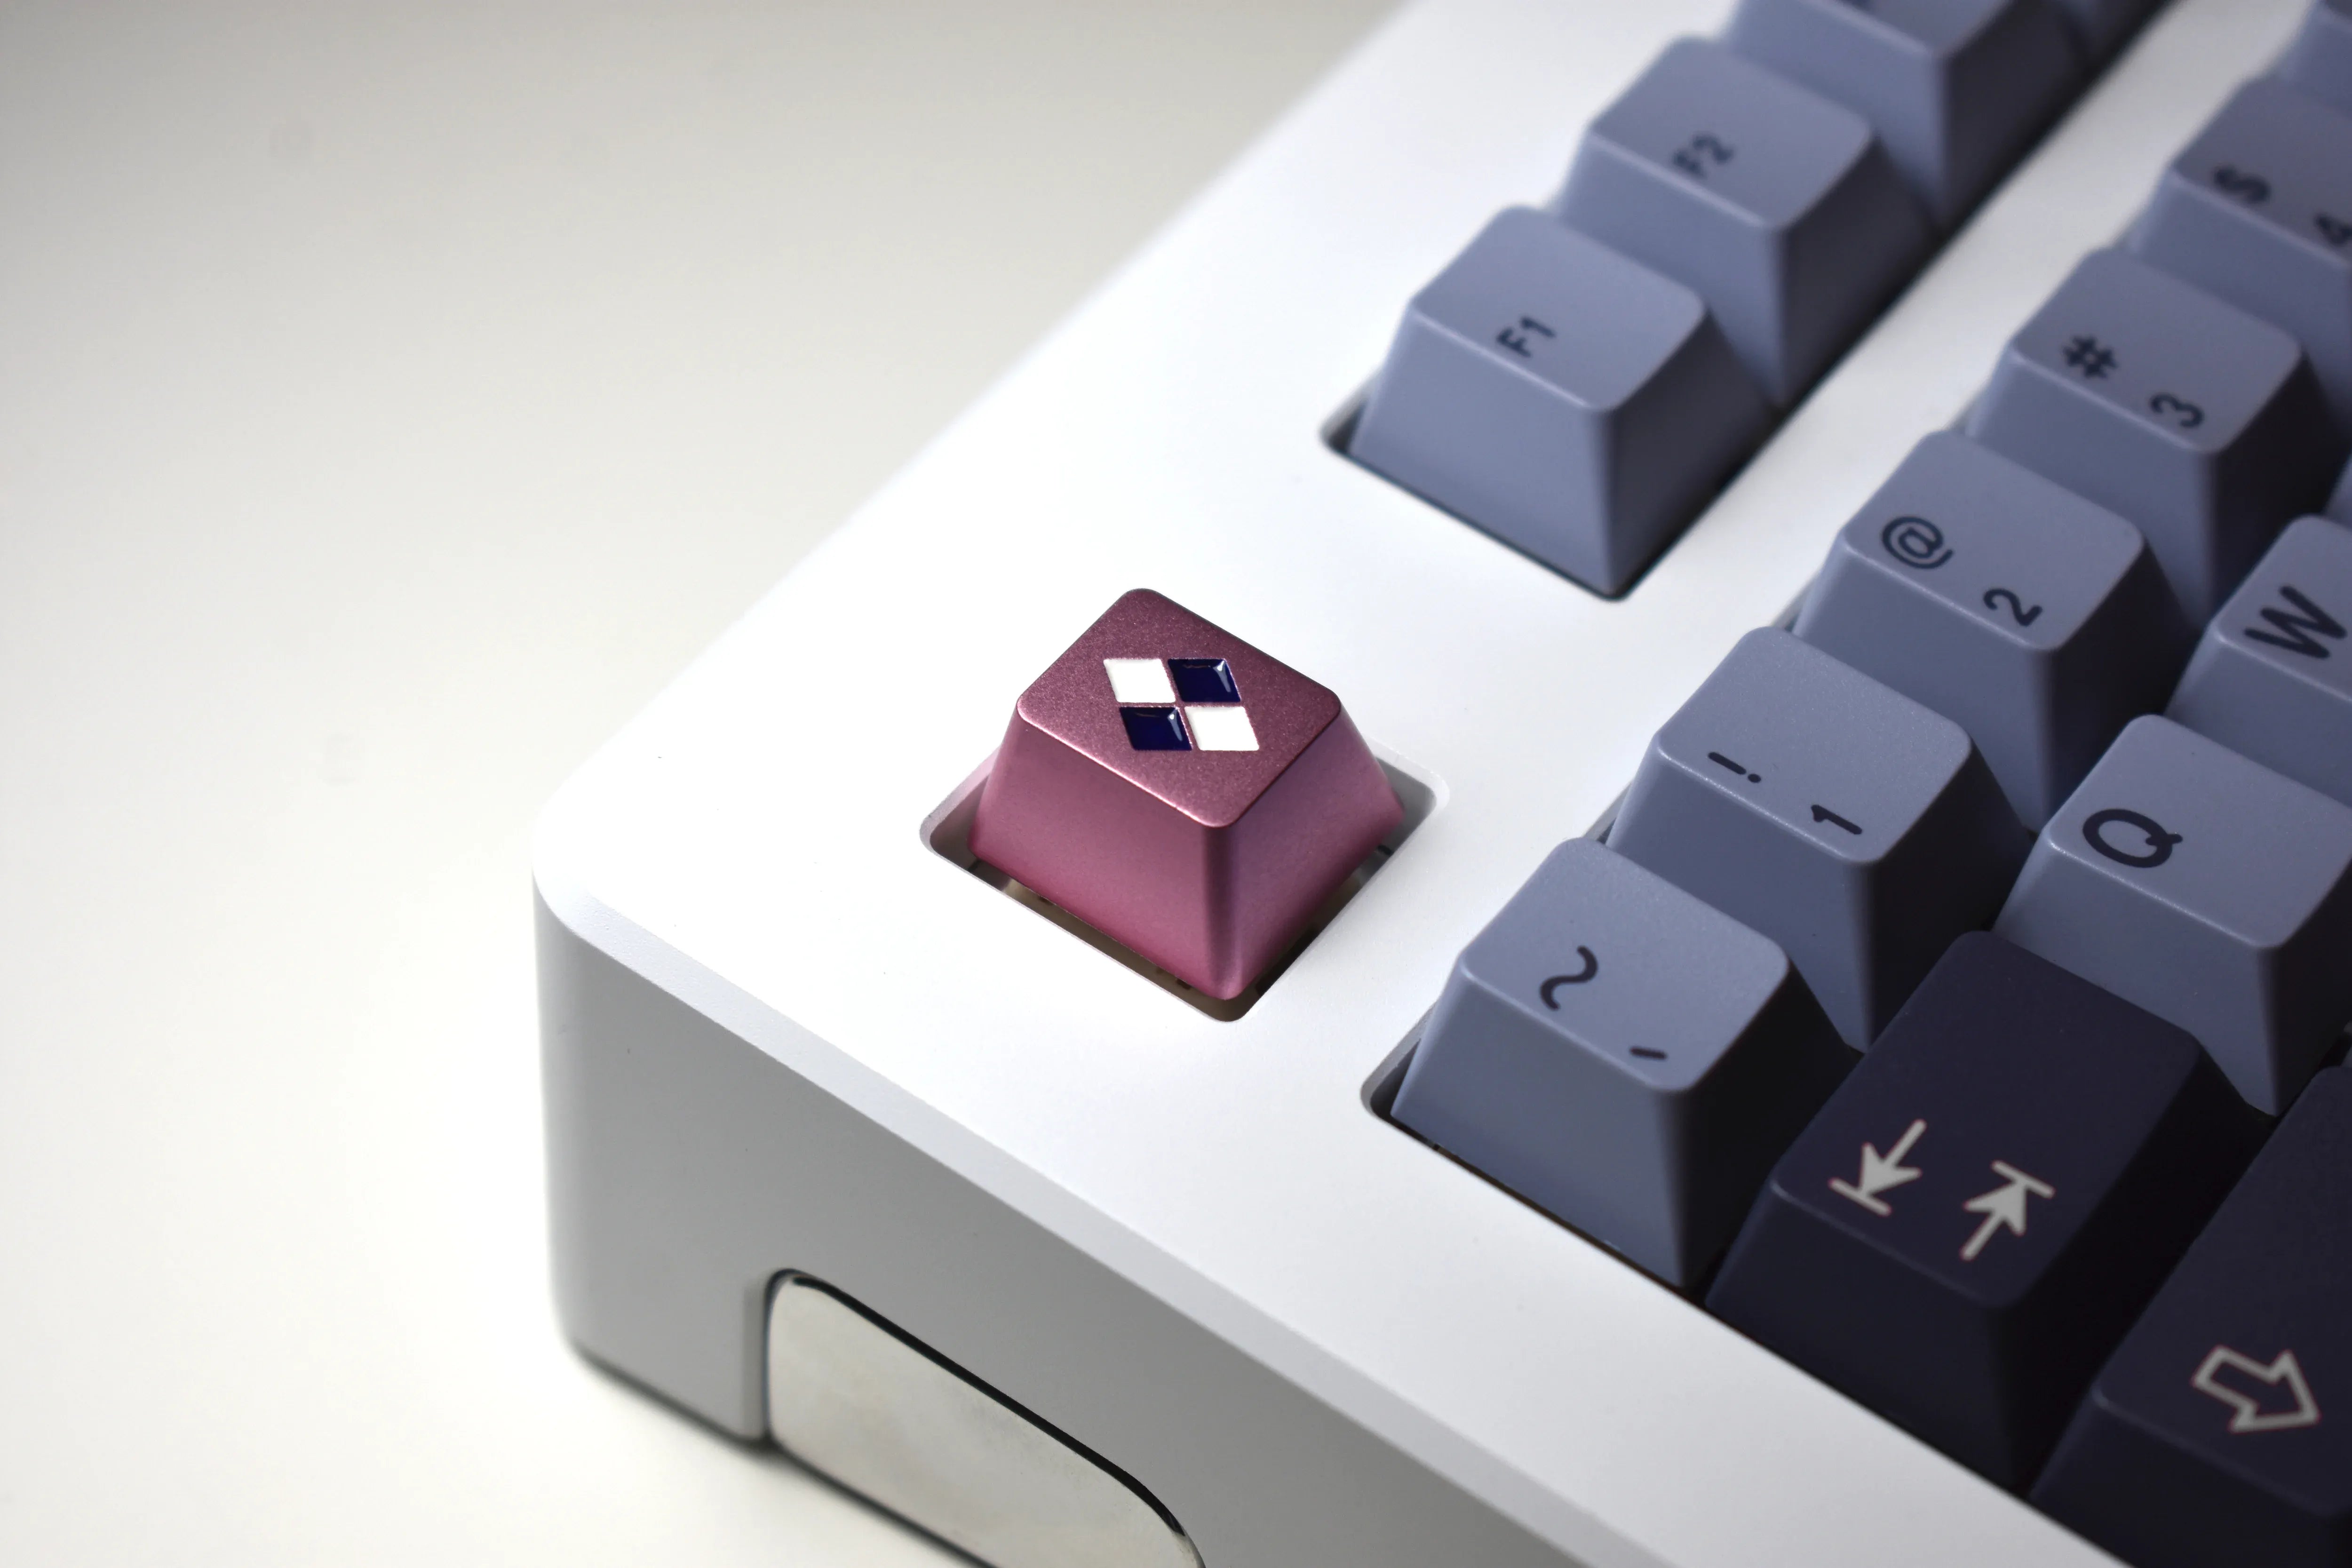 [In Stock] Artisan keycaps collection